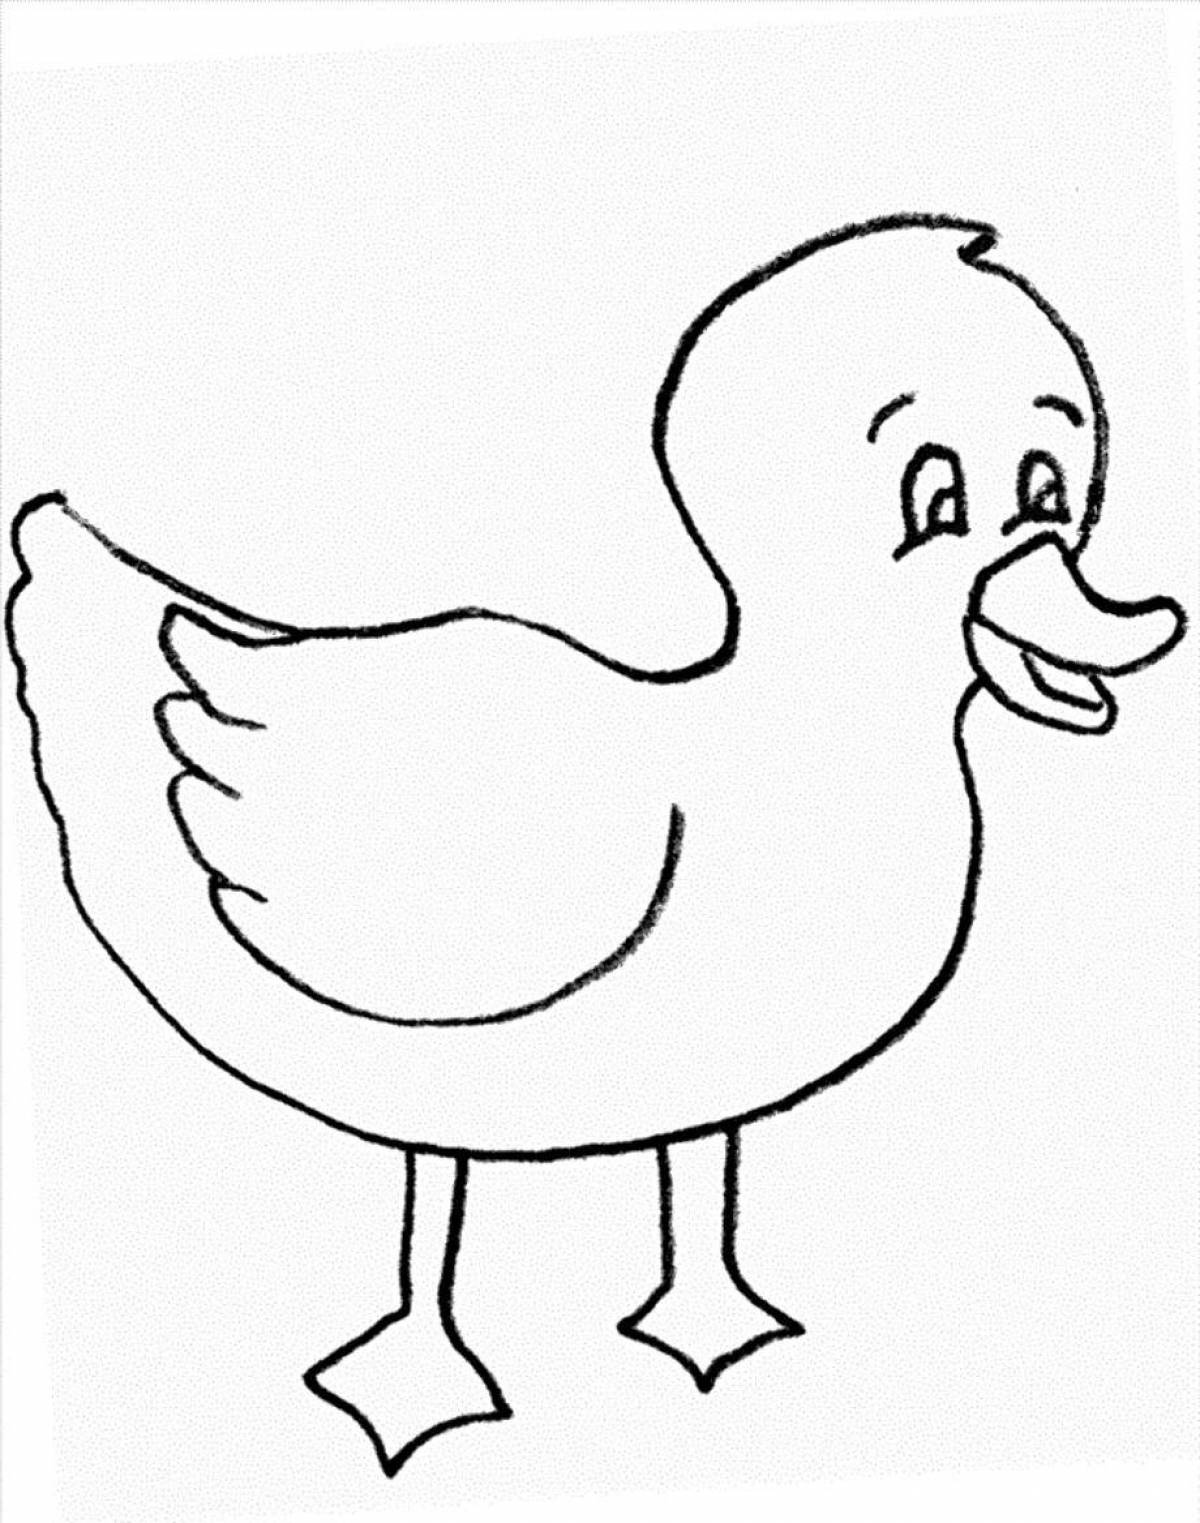 Coloring page playful little duck